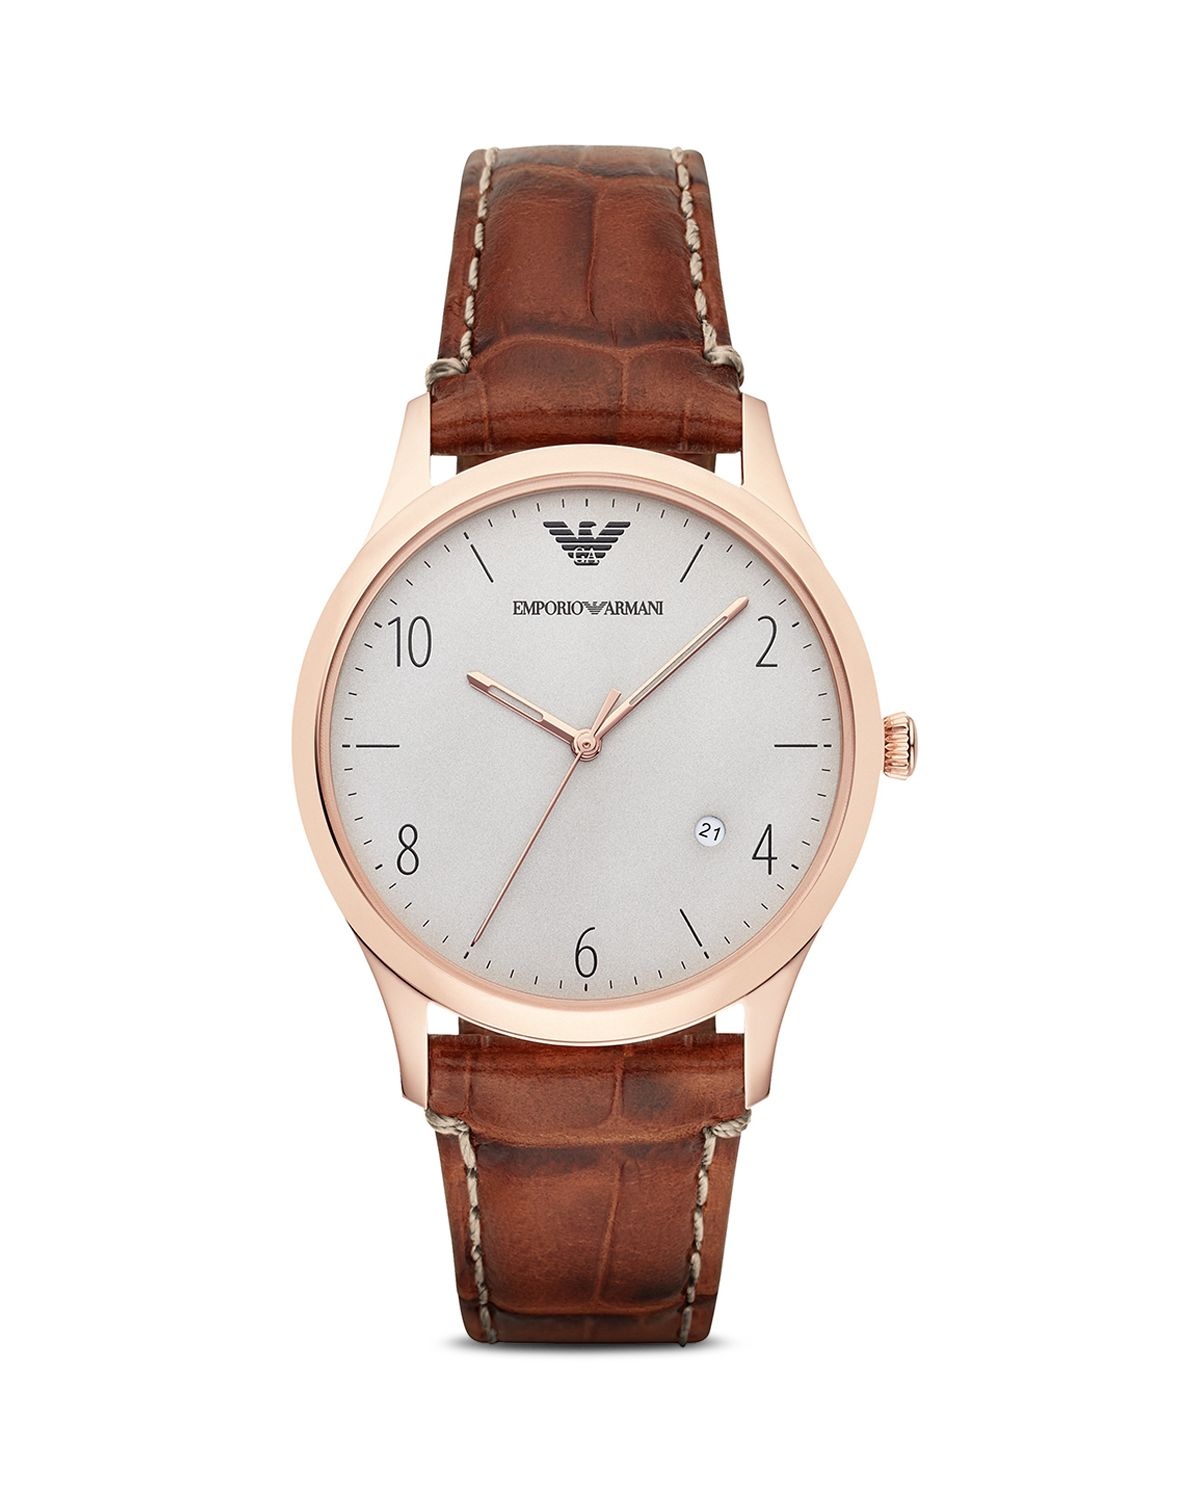 Lyst - Emporio Armani 3-hand Croc-embossed Leather Strap Watch, 41mm in Brown for Men